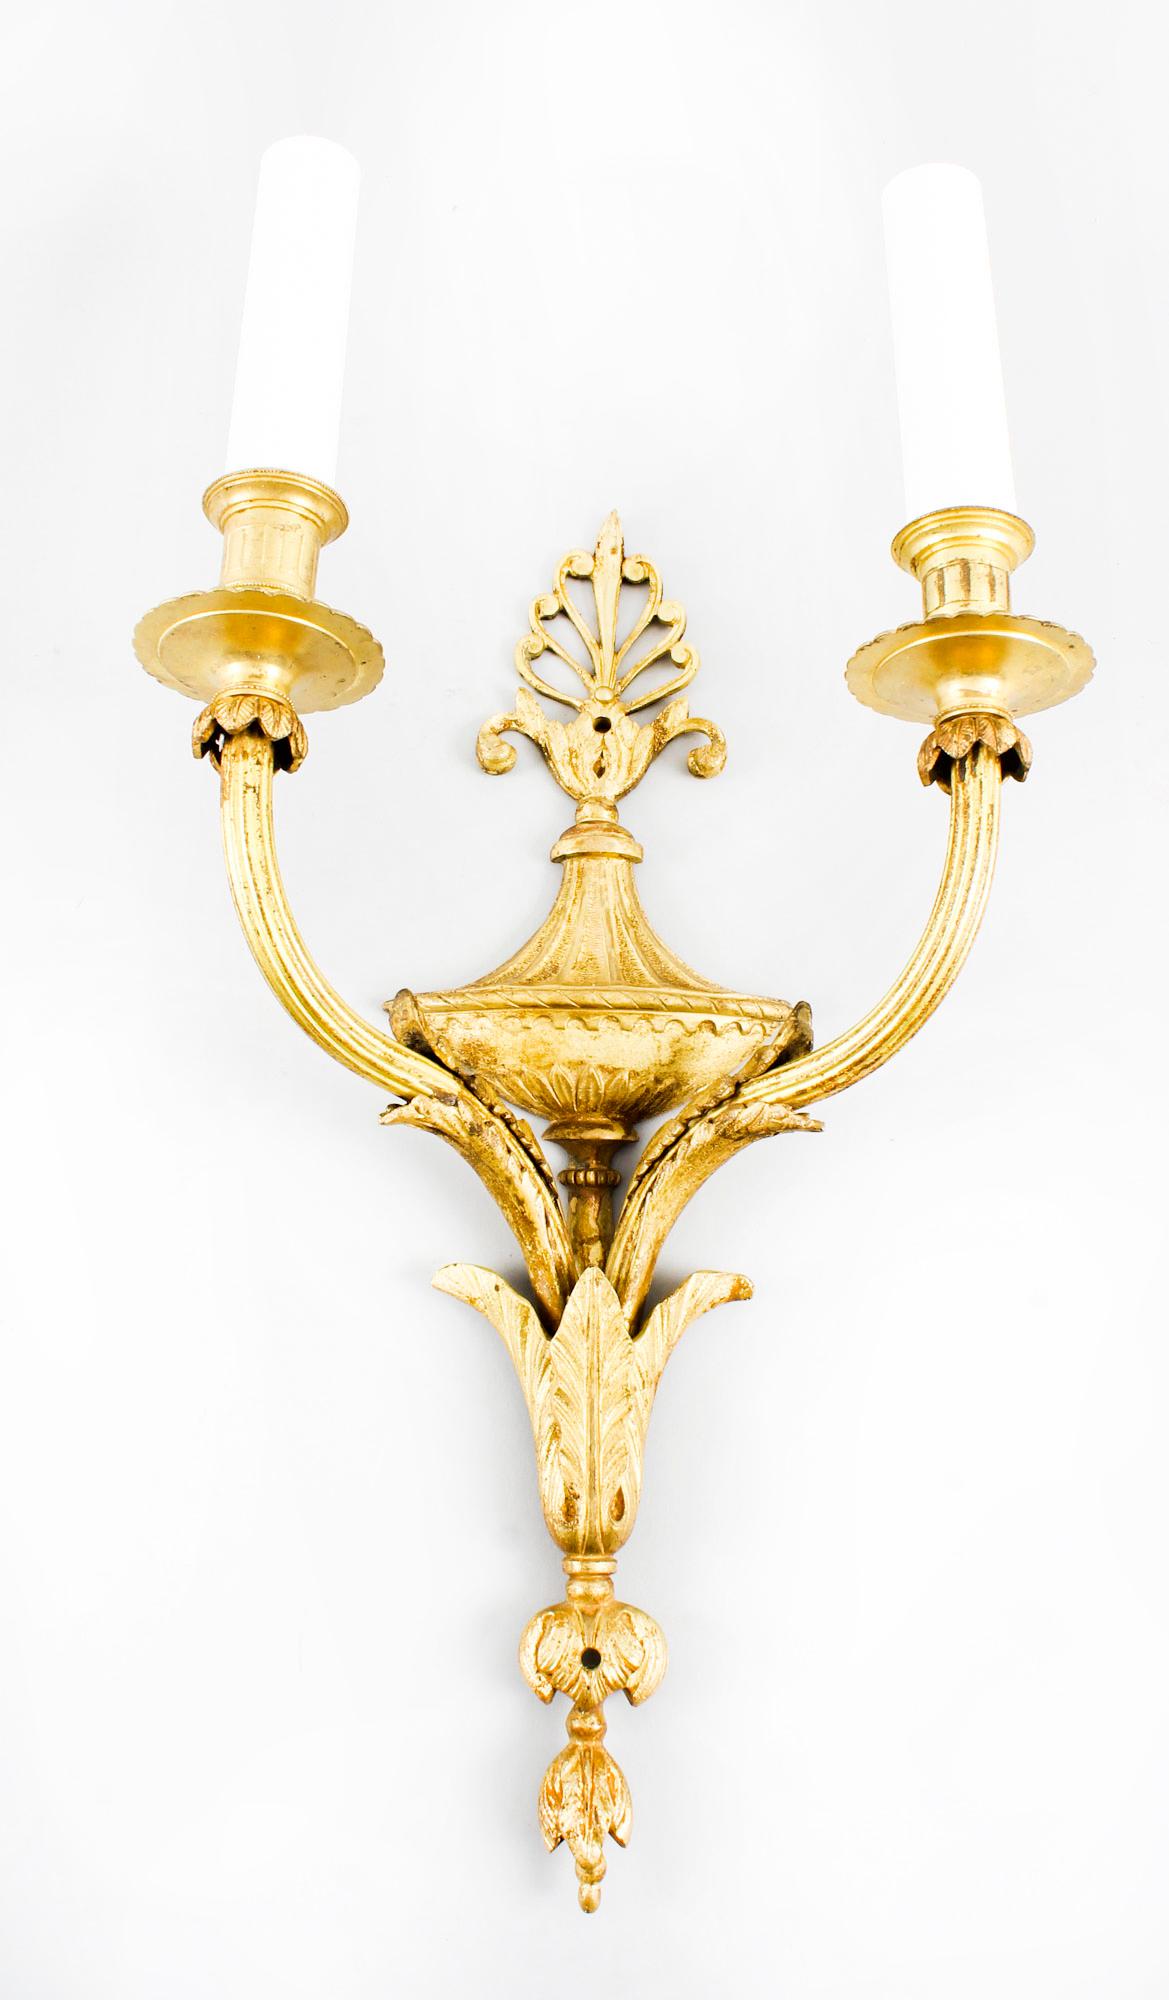 This is a stunning set of four Regency style twin branch ormolu wall lights dating from the late 19th century.

The lights feature classical Regency elements with anthemion, classical urn and palmette cast backplates issuing twin reeded scrolled